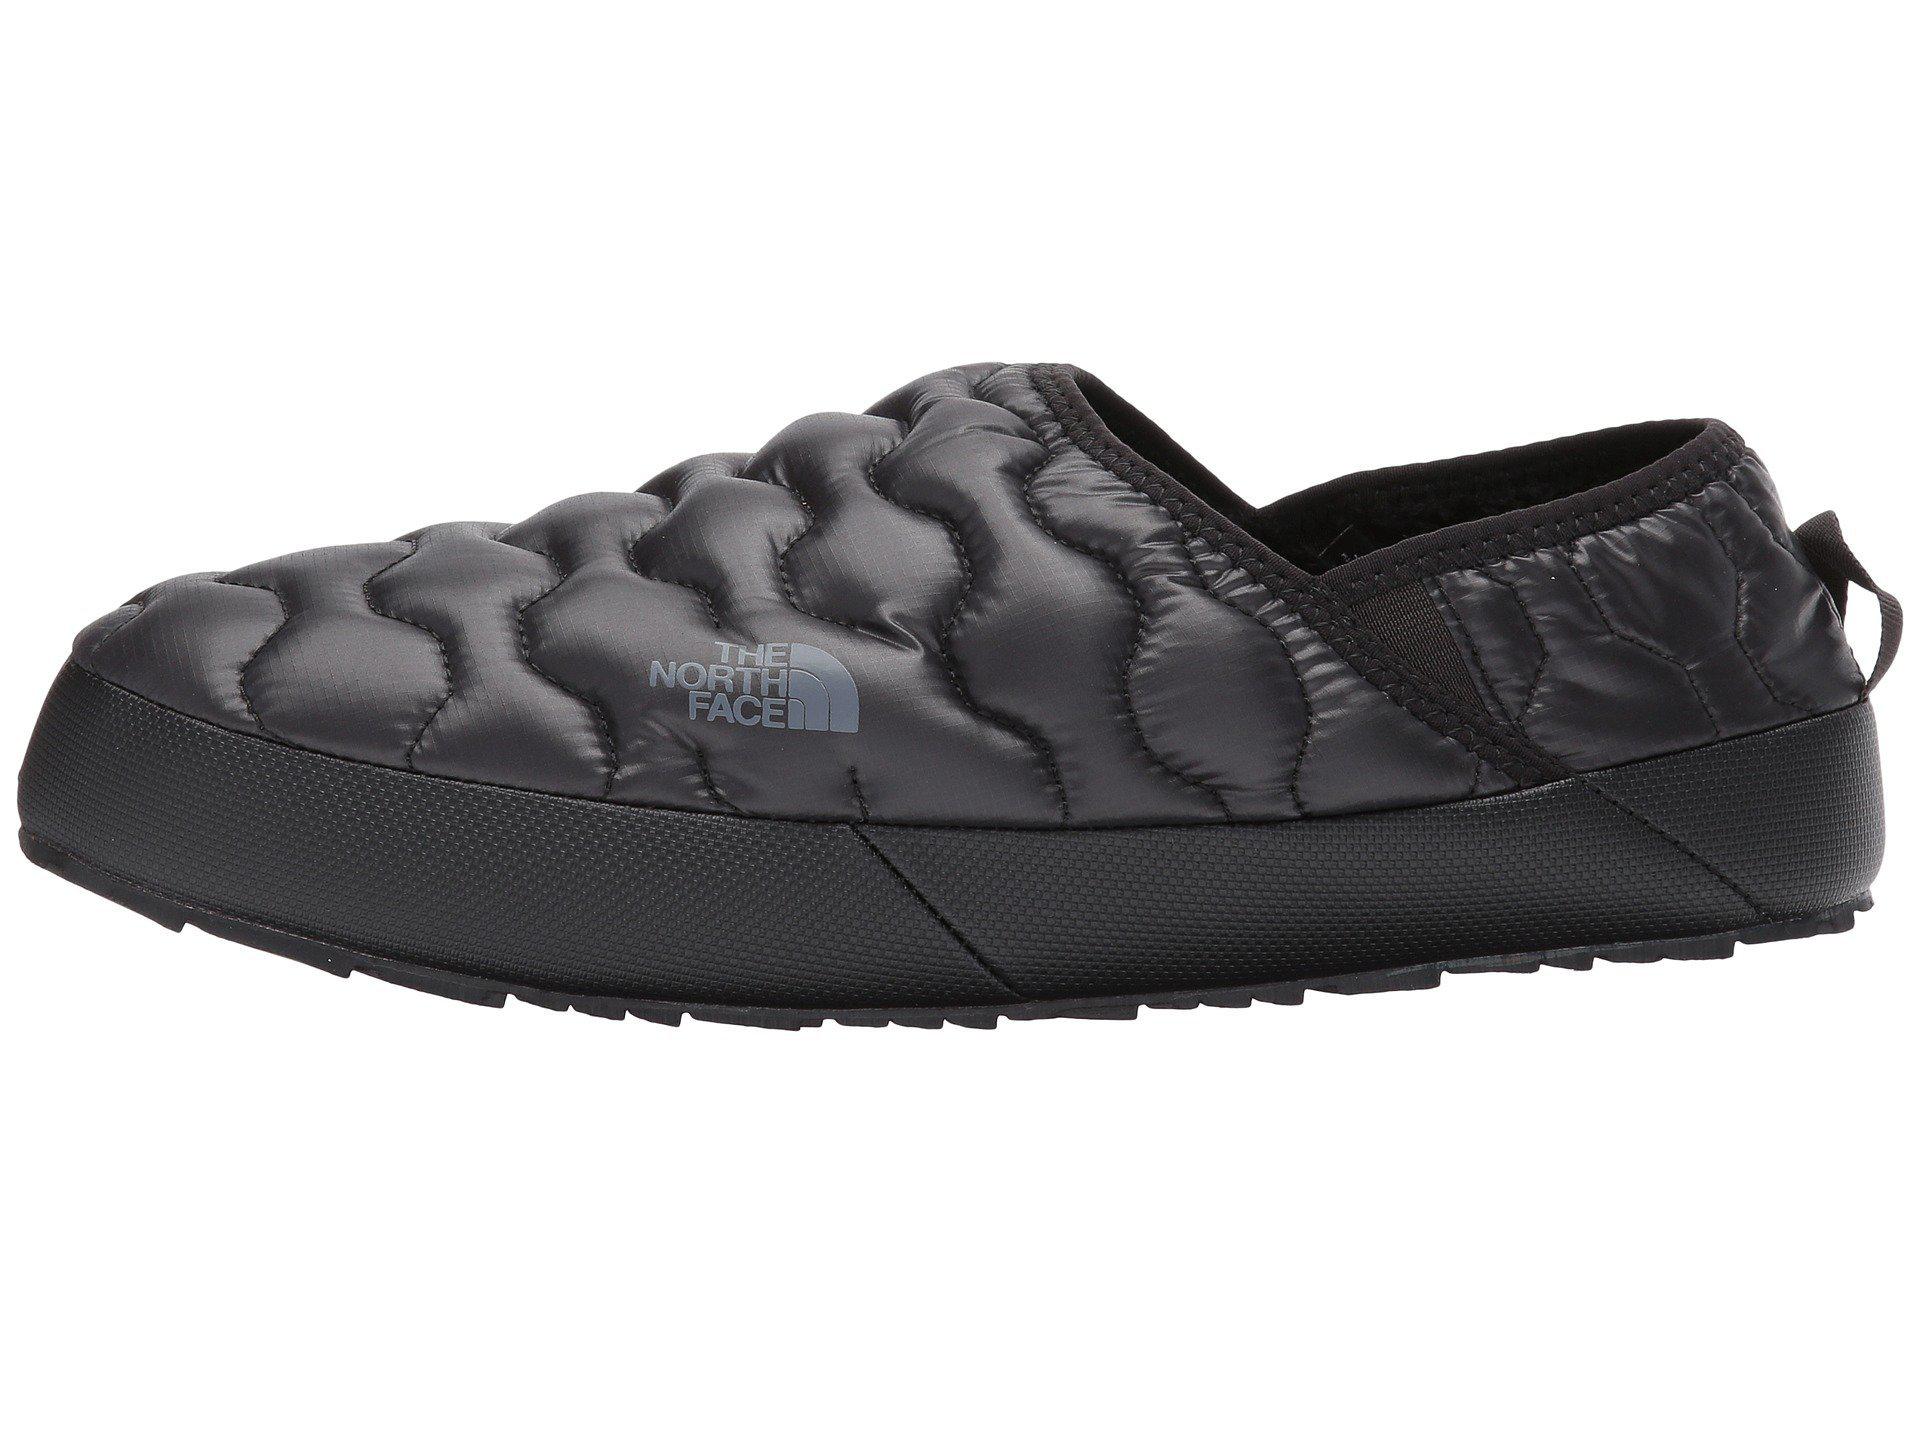 The North Face Fleece Thermoball Traction Mule Iv in Black for Men - Lyst